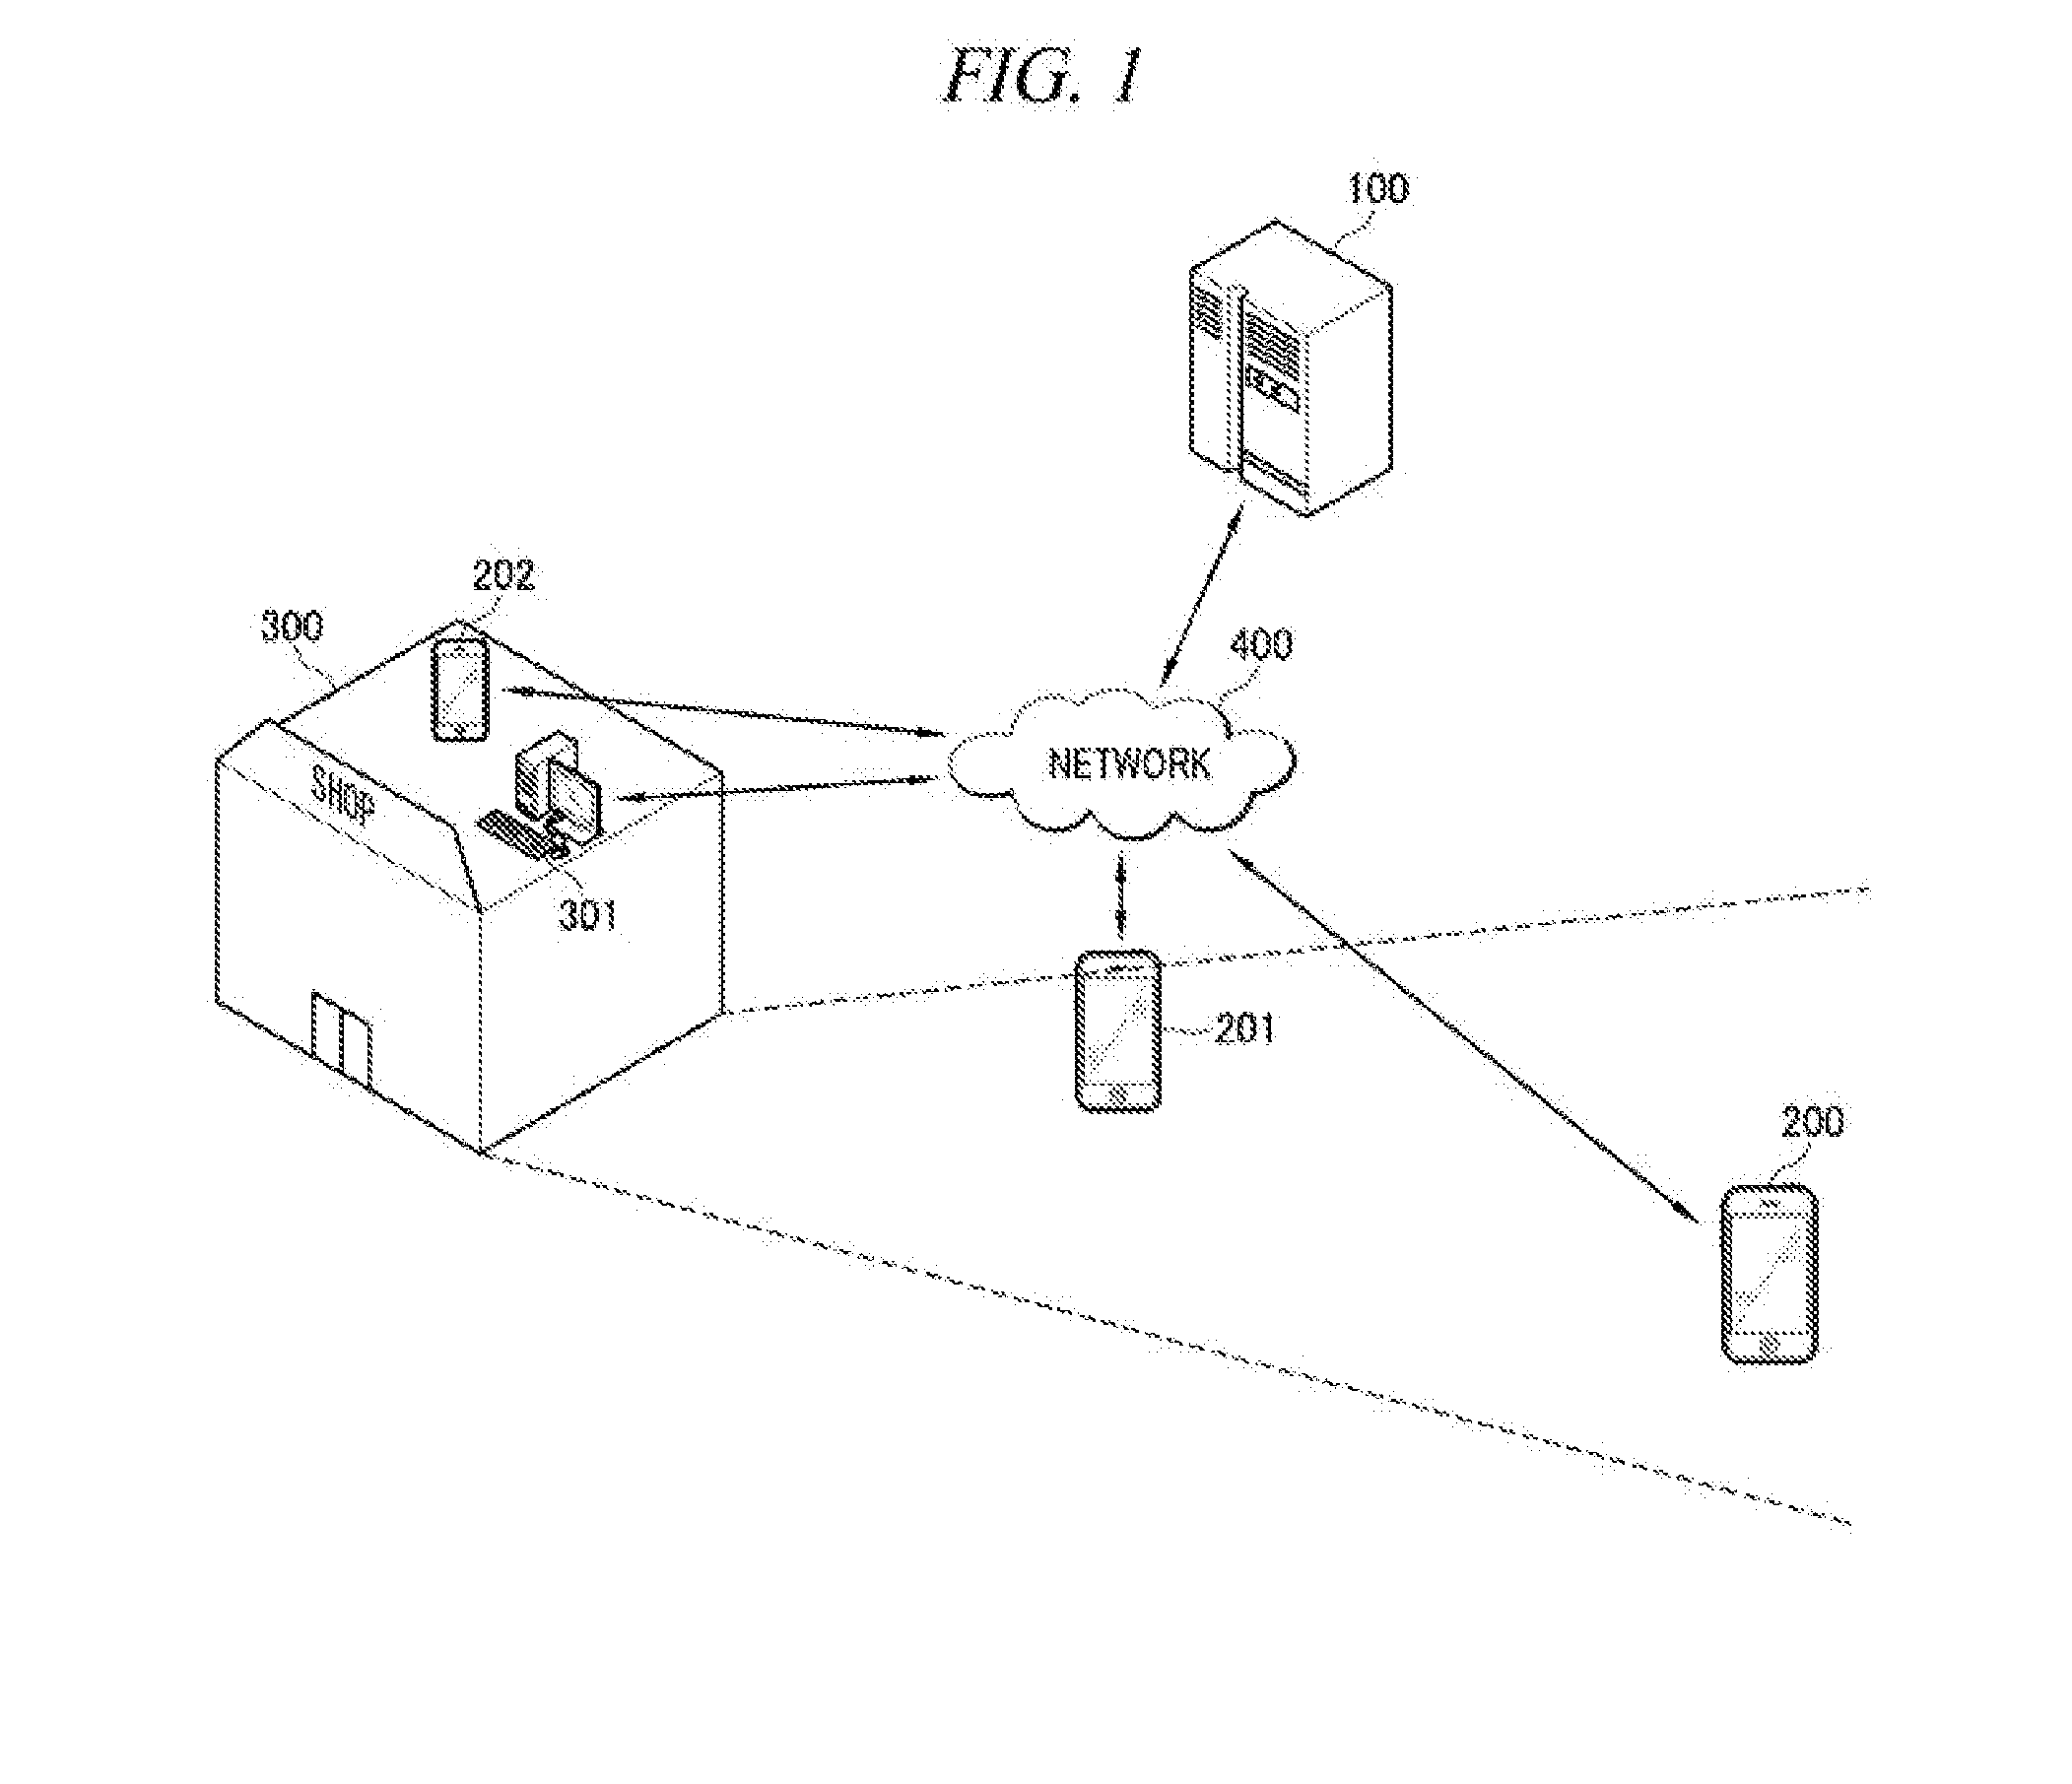 Server and method for providing reward to device based on position information of device, and device